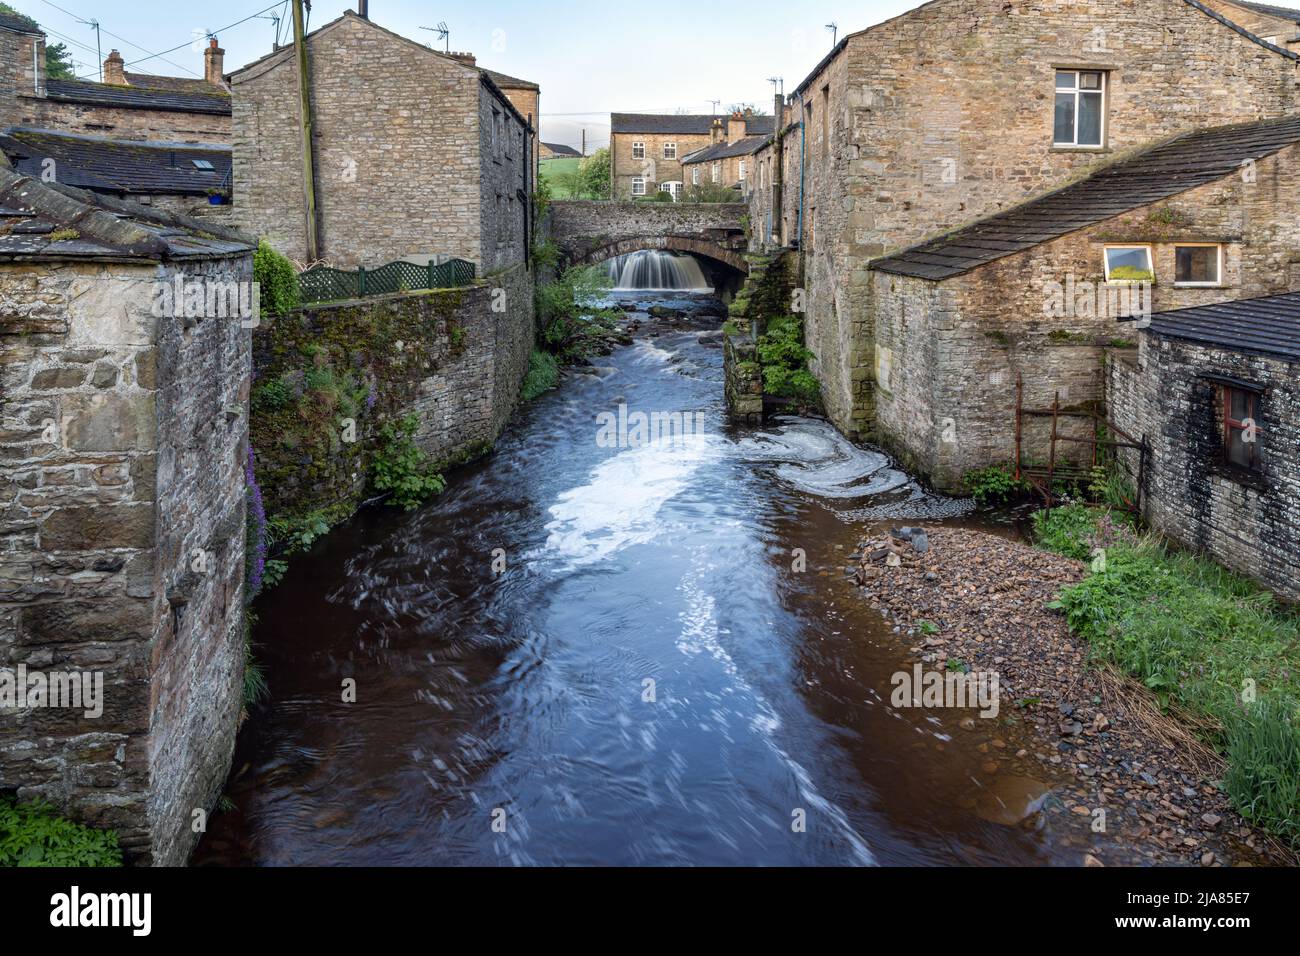 Gayle Beck runs through the centre of the picturesque Yorkshire Dales town of Hawes, Wensleydale, England, Uk Stock Photo